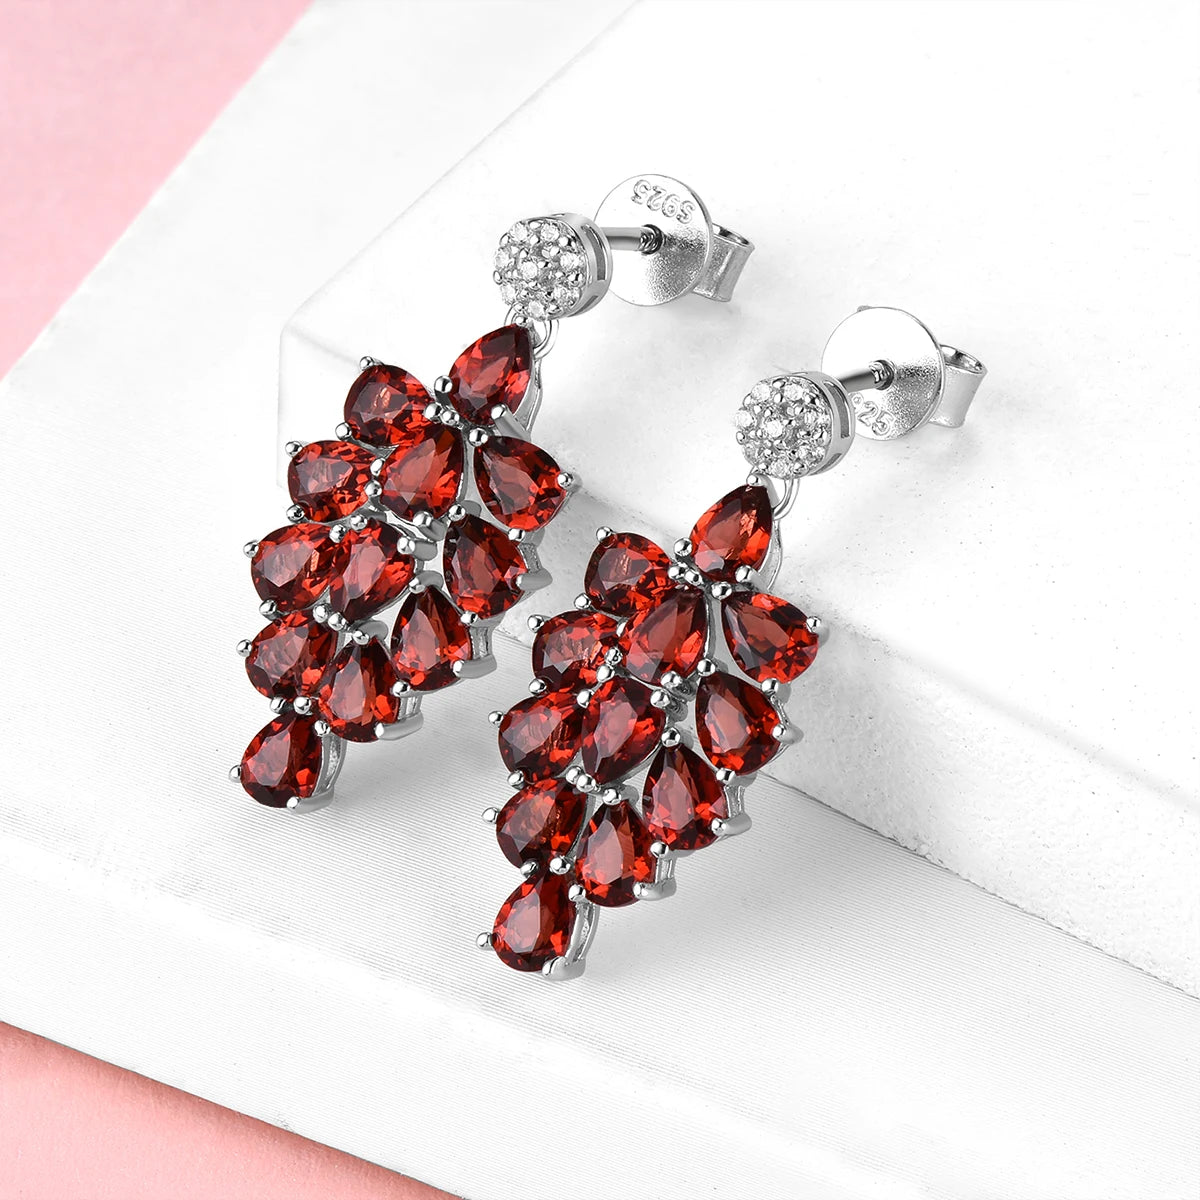 Natural Red Garnet Sterling Silver Earring 4.8 Carats Genuine Gemstone Romantic Exquisite Style Wedding Engagement Fine Jewelrys